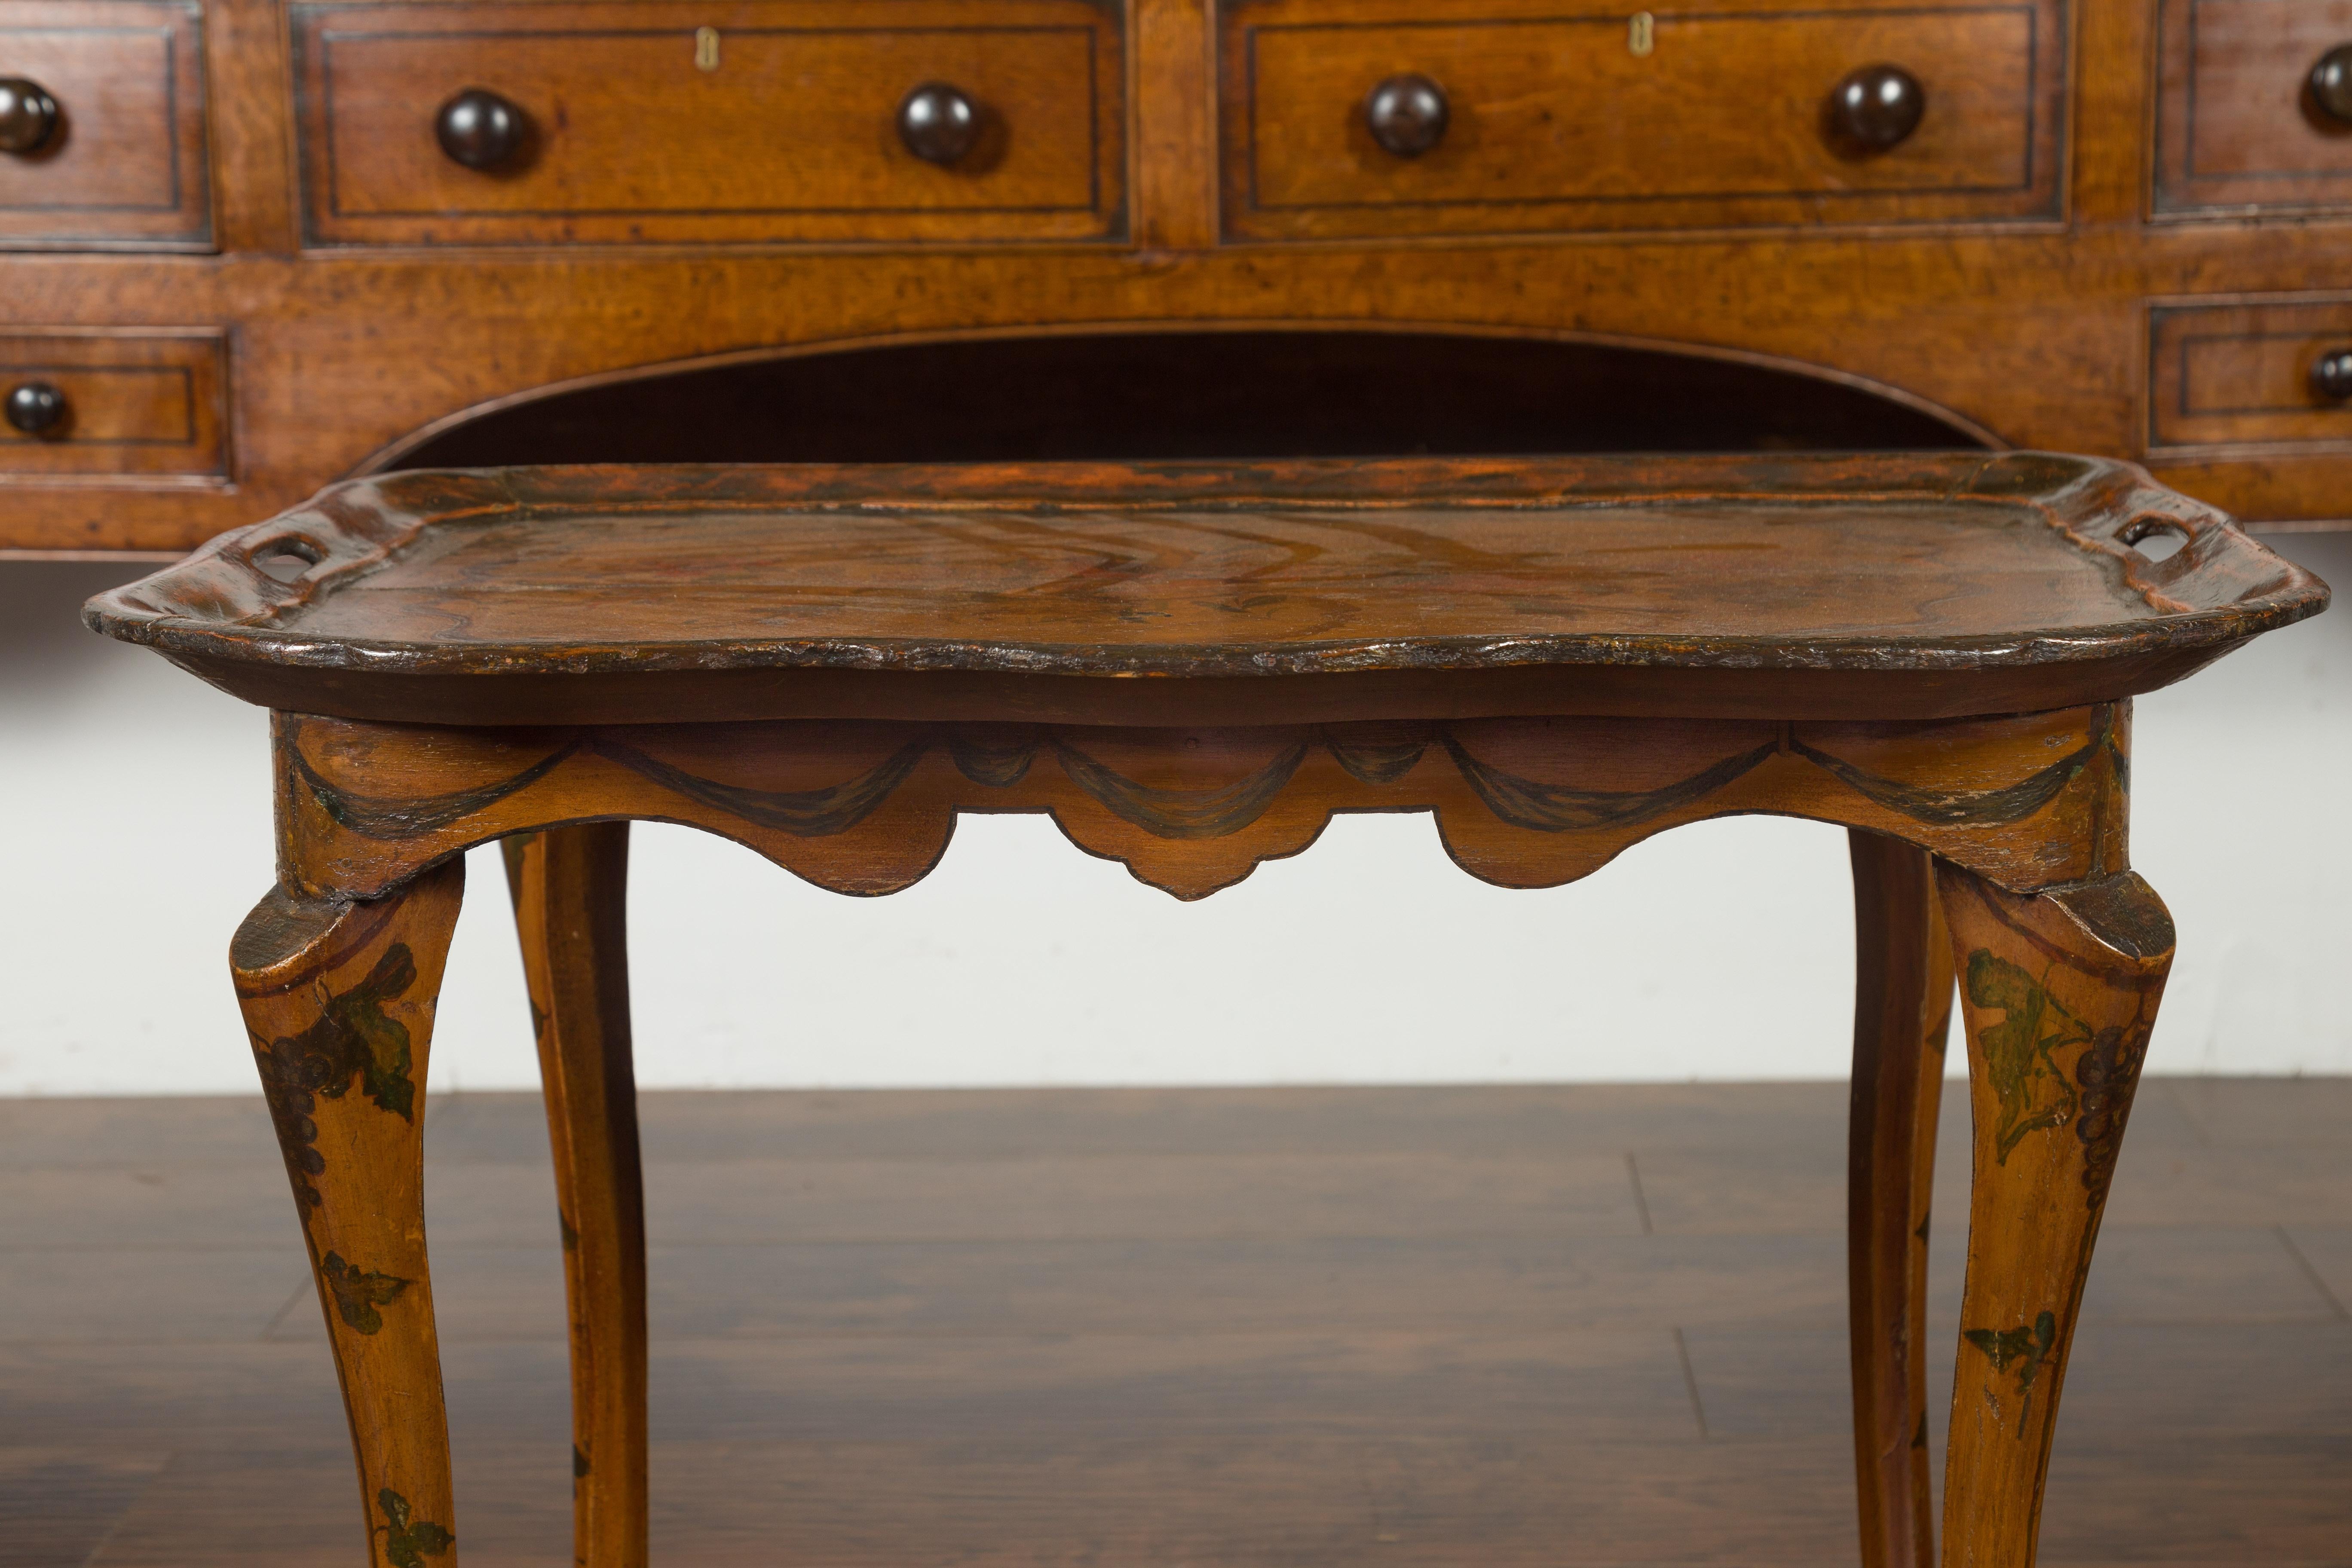 20th Century Italian Painted Wood Tray Top Table with Bird and Floral Motifs, circa 1920